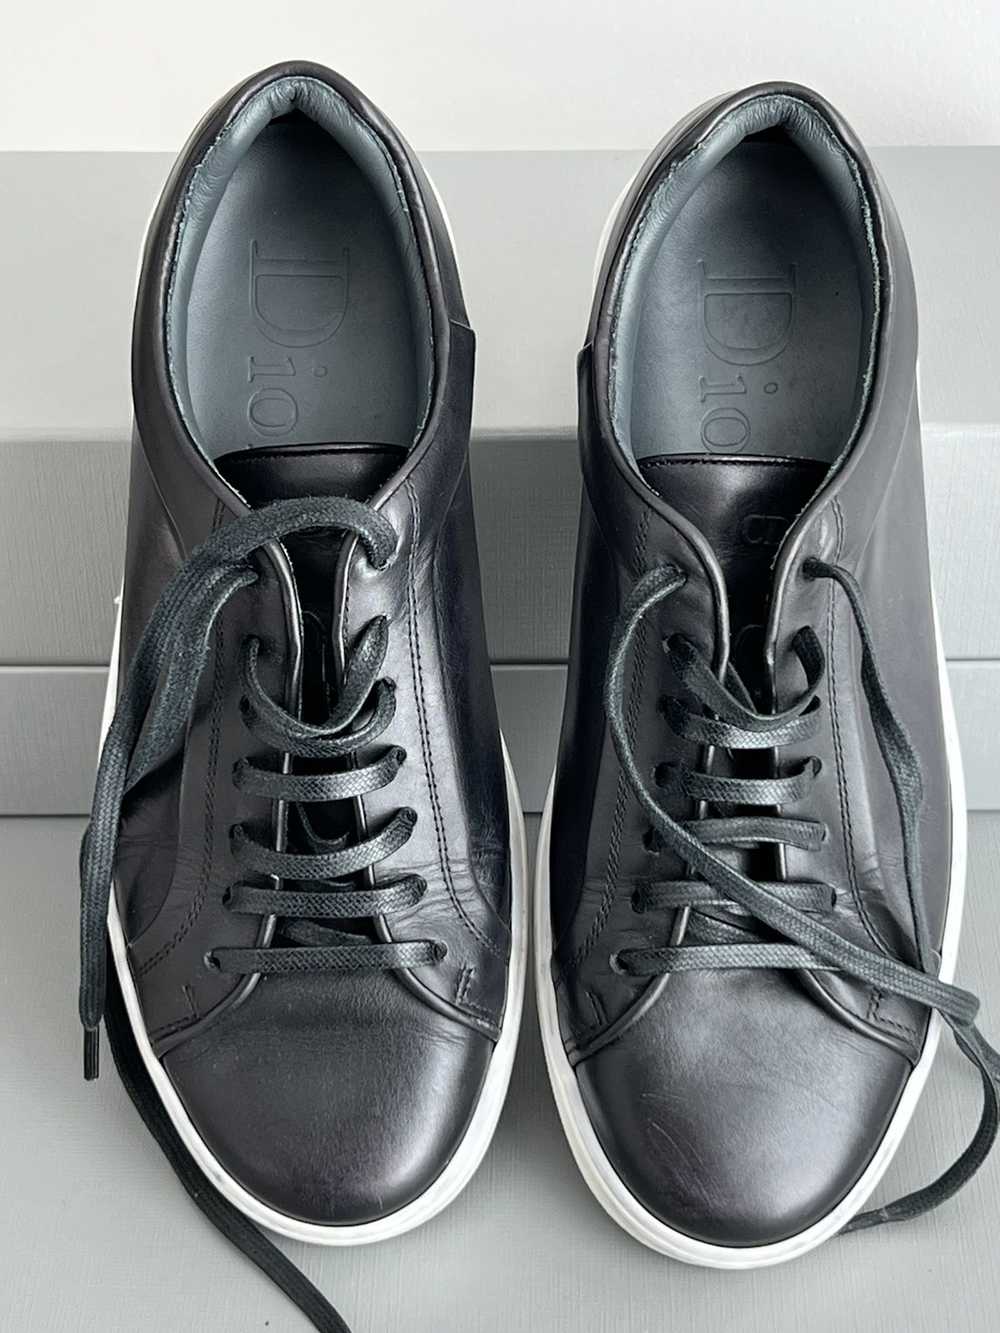 Dior Basic Dior Homme black & white sneakers - image 5